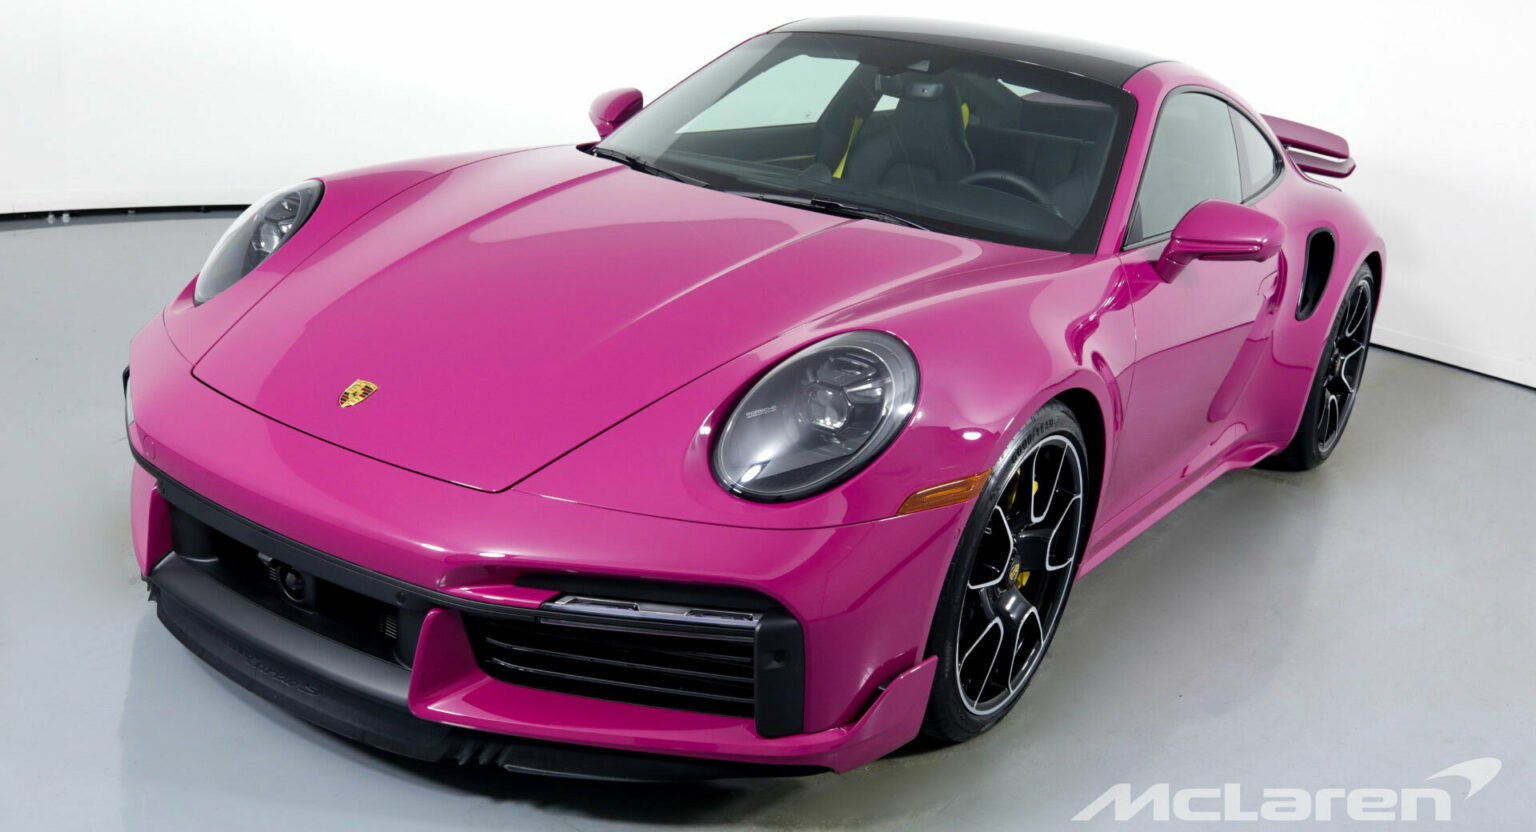 For 320k Can You Handle This Porsche 911 Turbo S In Rubystone Red